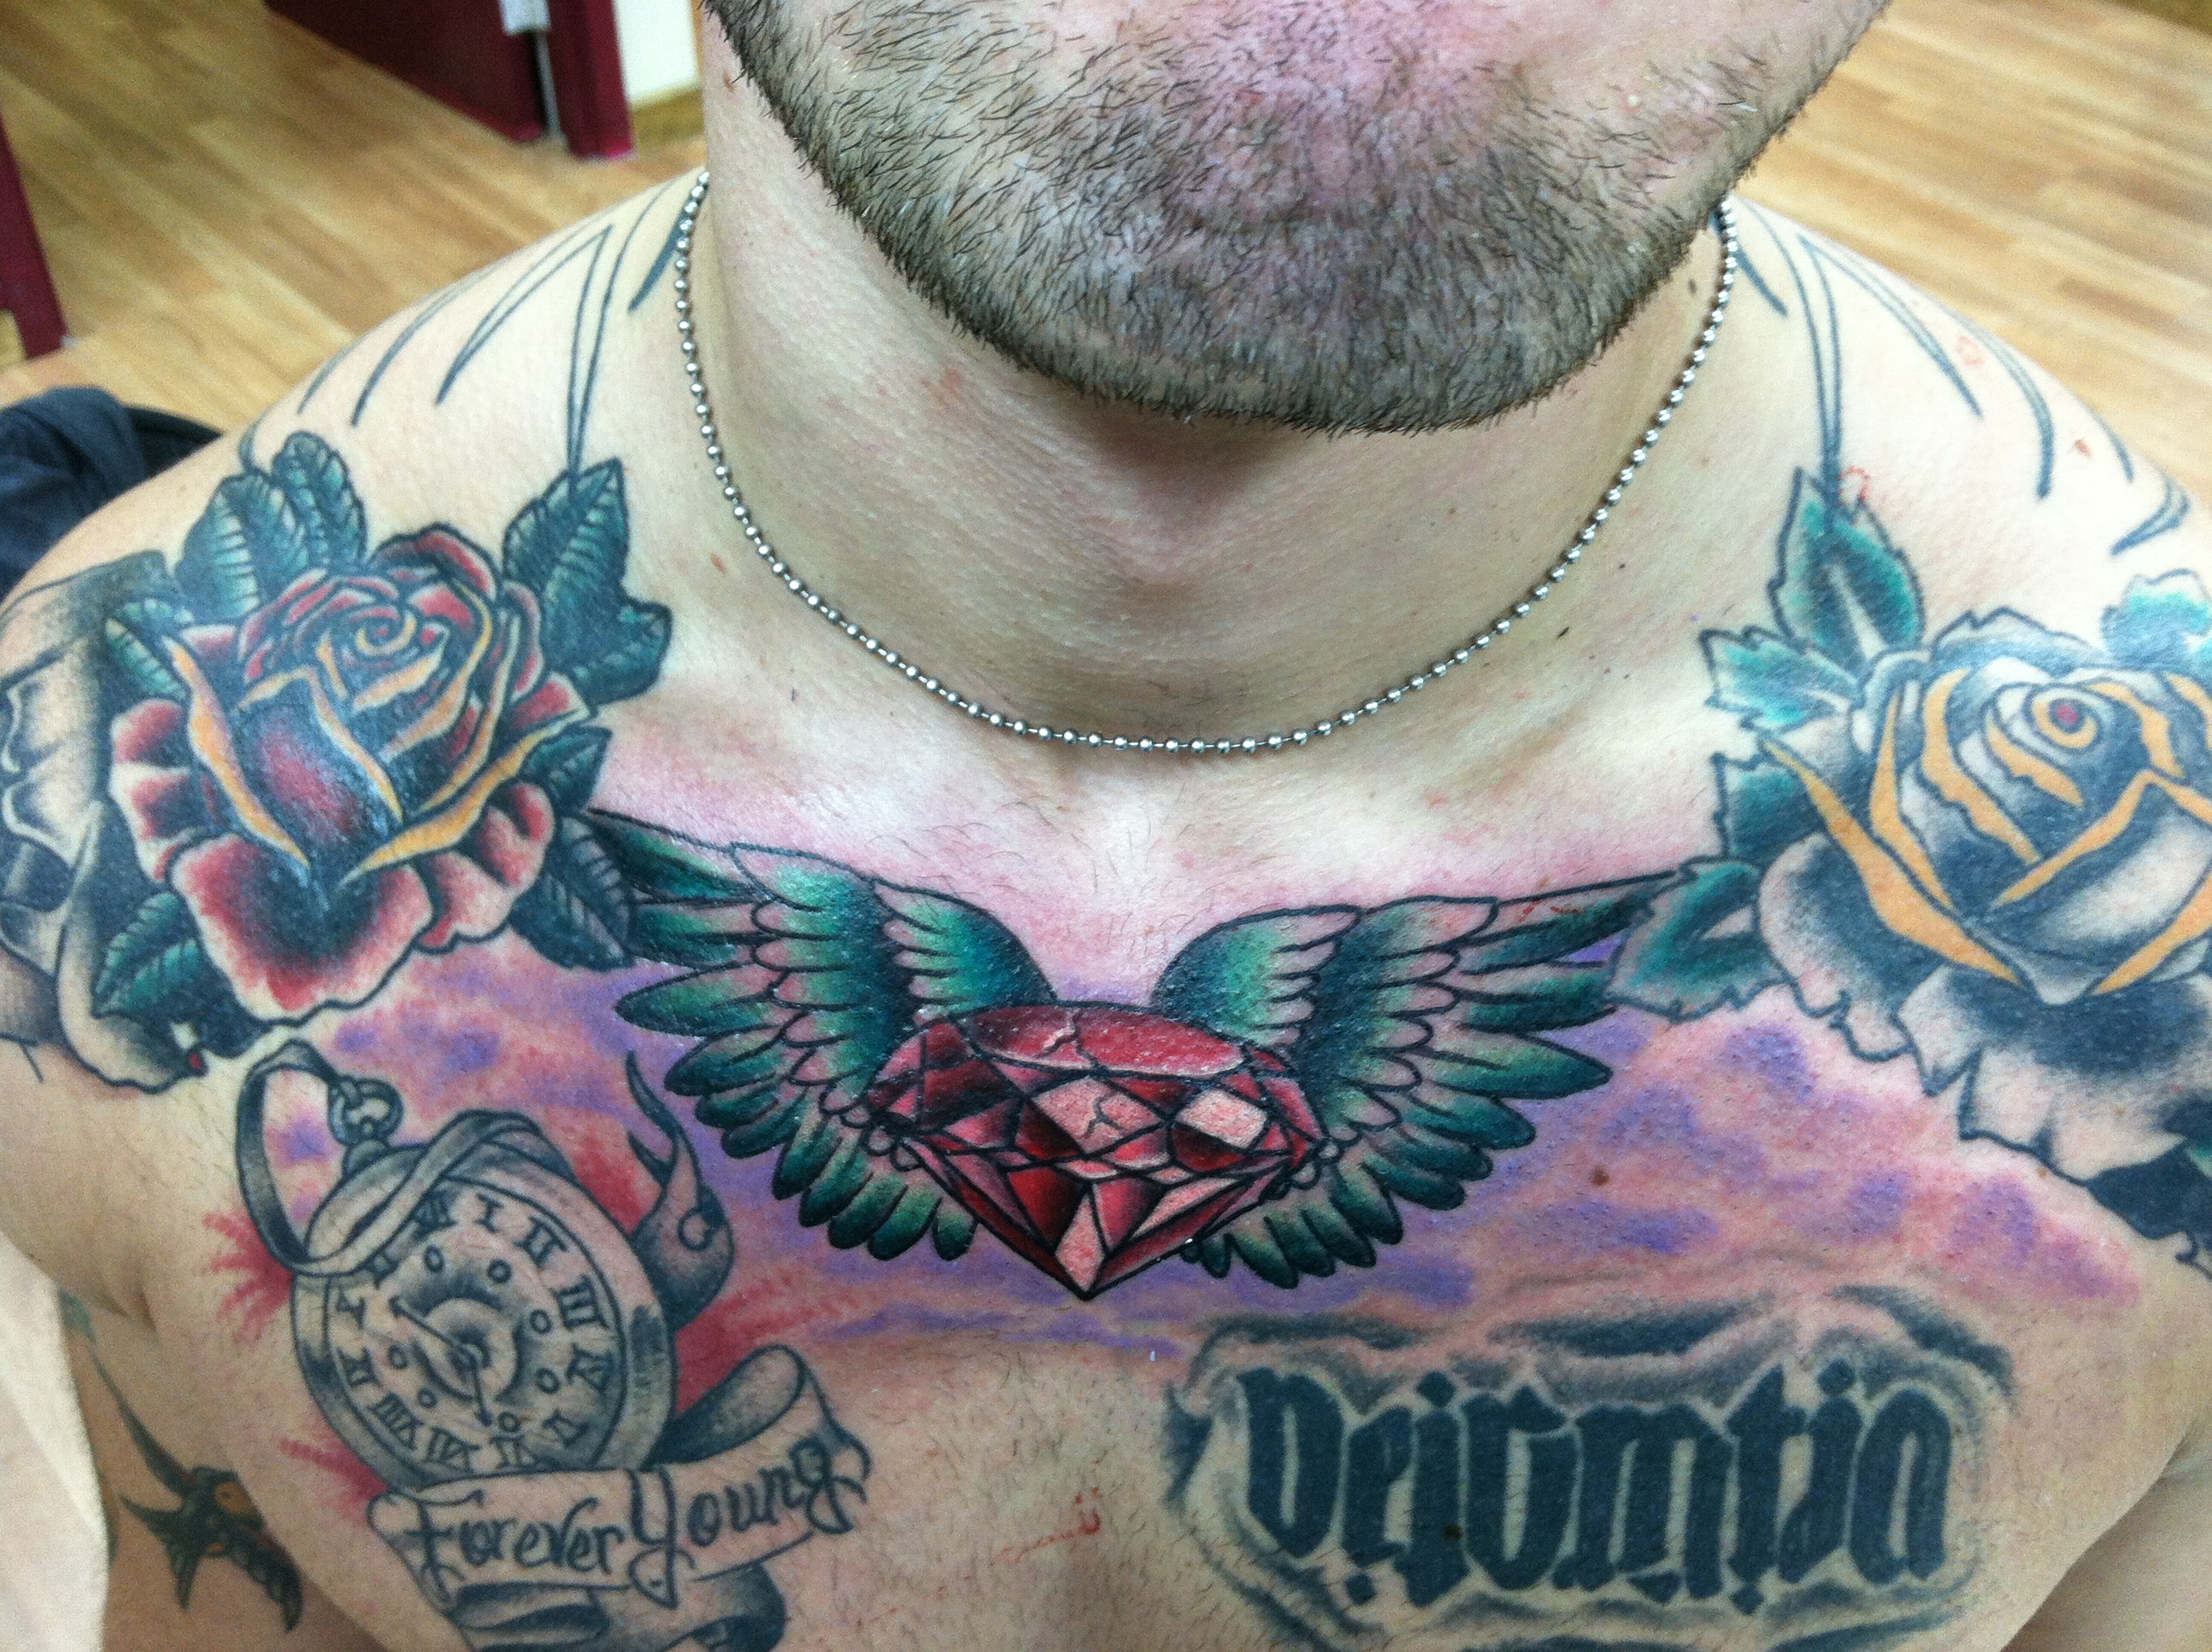 Cherry blossoms as filler on Jakes chest 